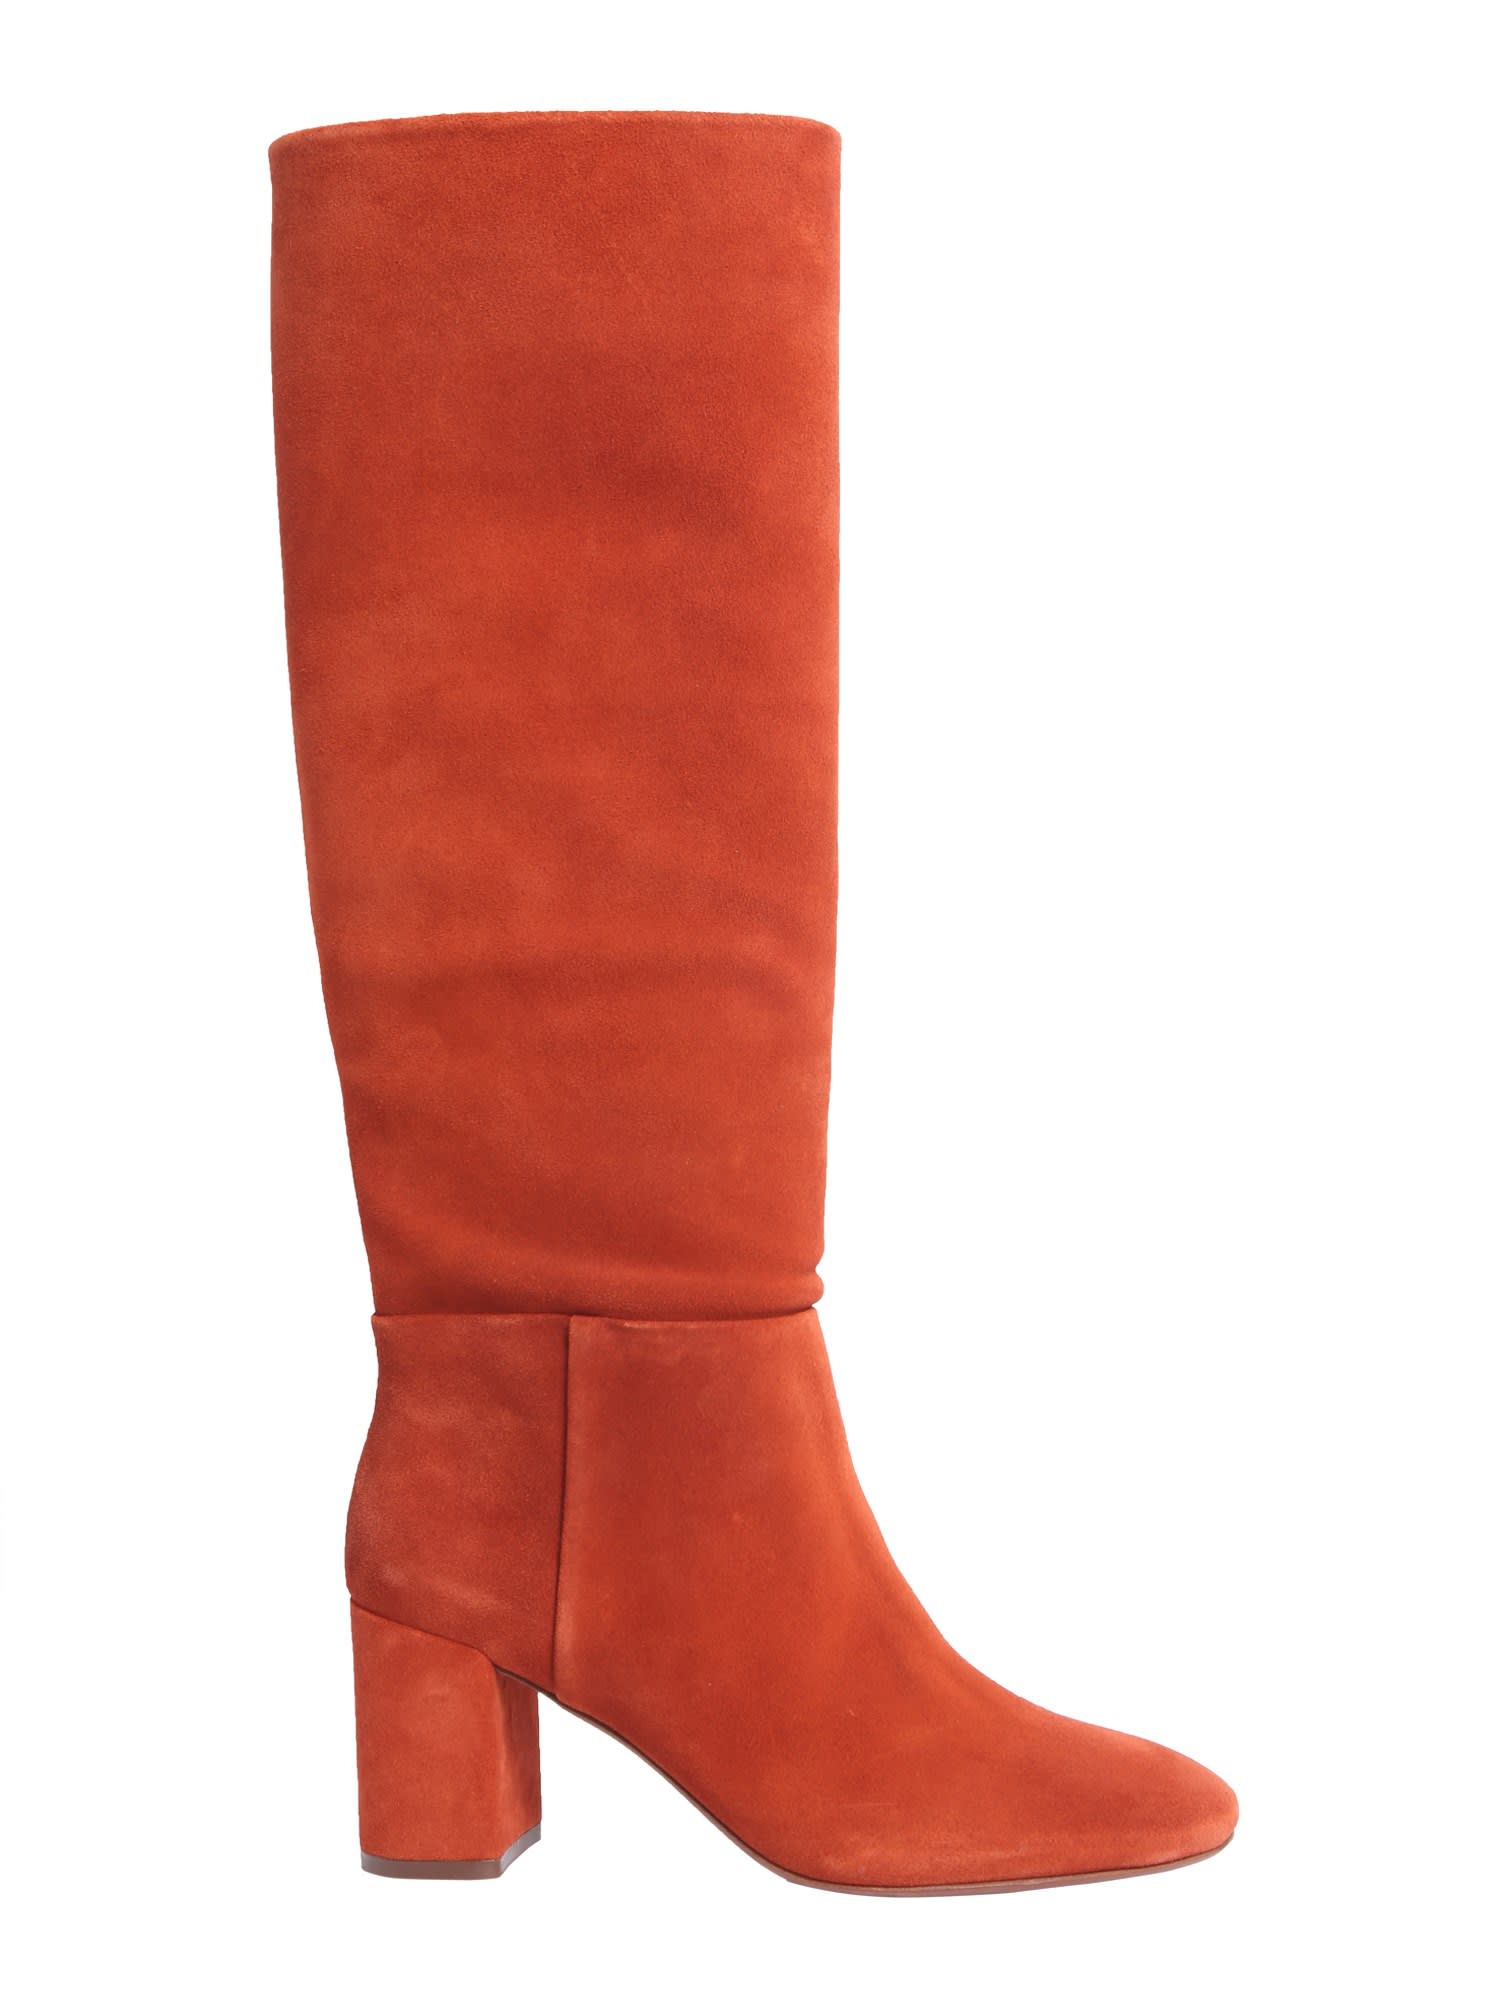 Tory Burch Brooke Slouchy Boots